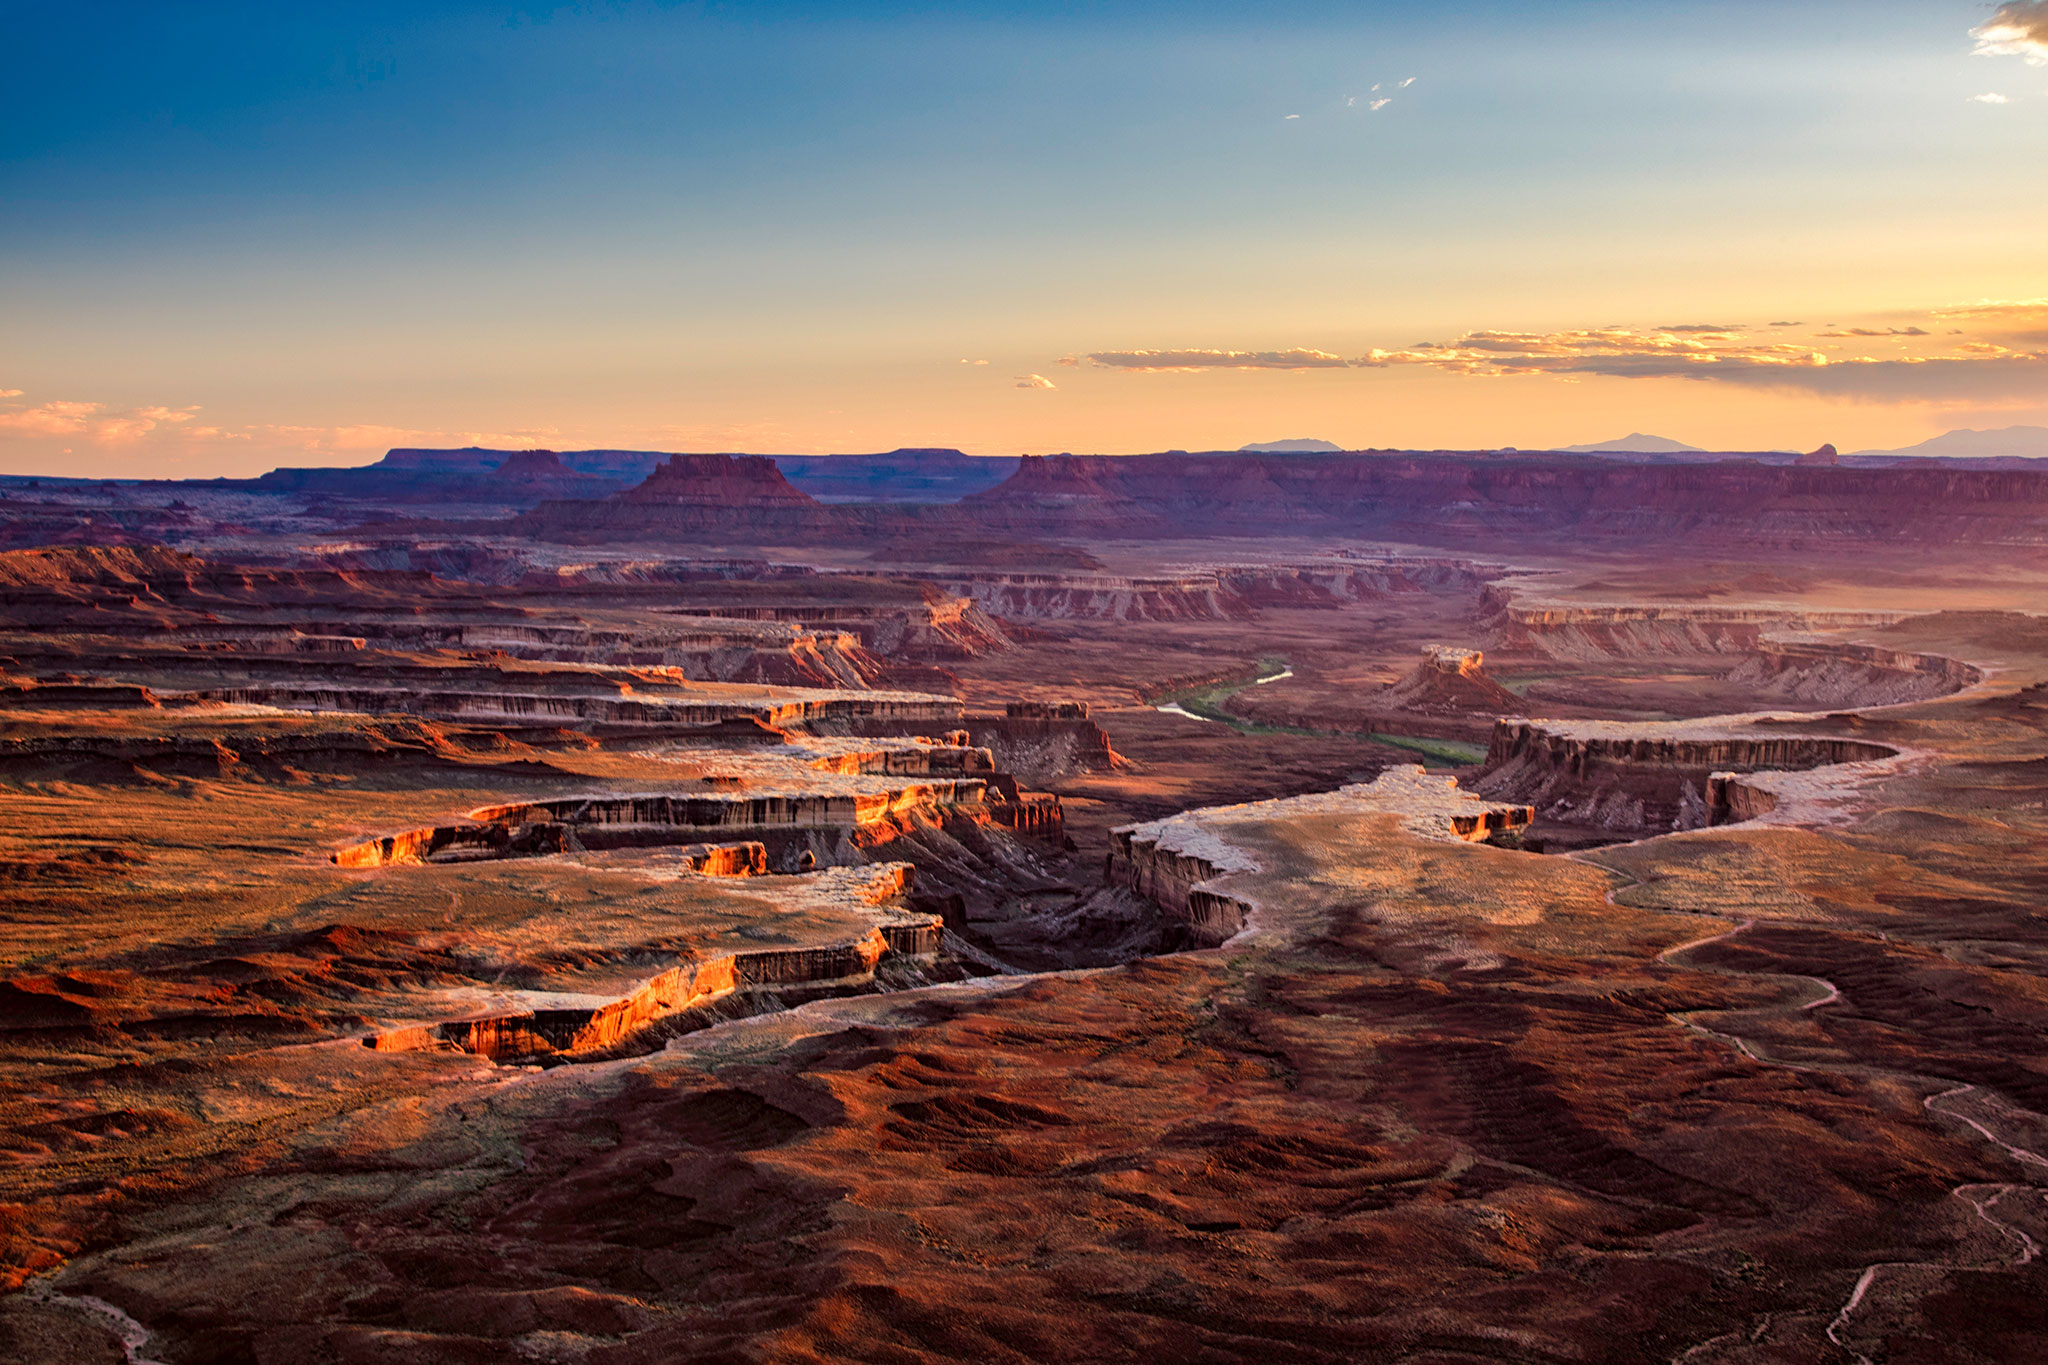 The Green River Overlook offers a fantastic view of Canyonlands National Park